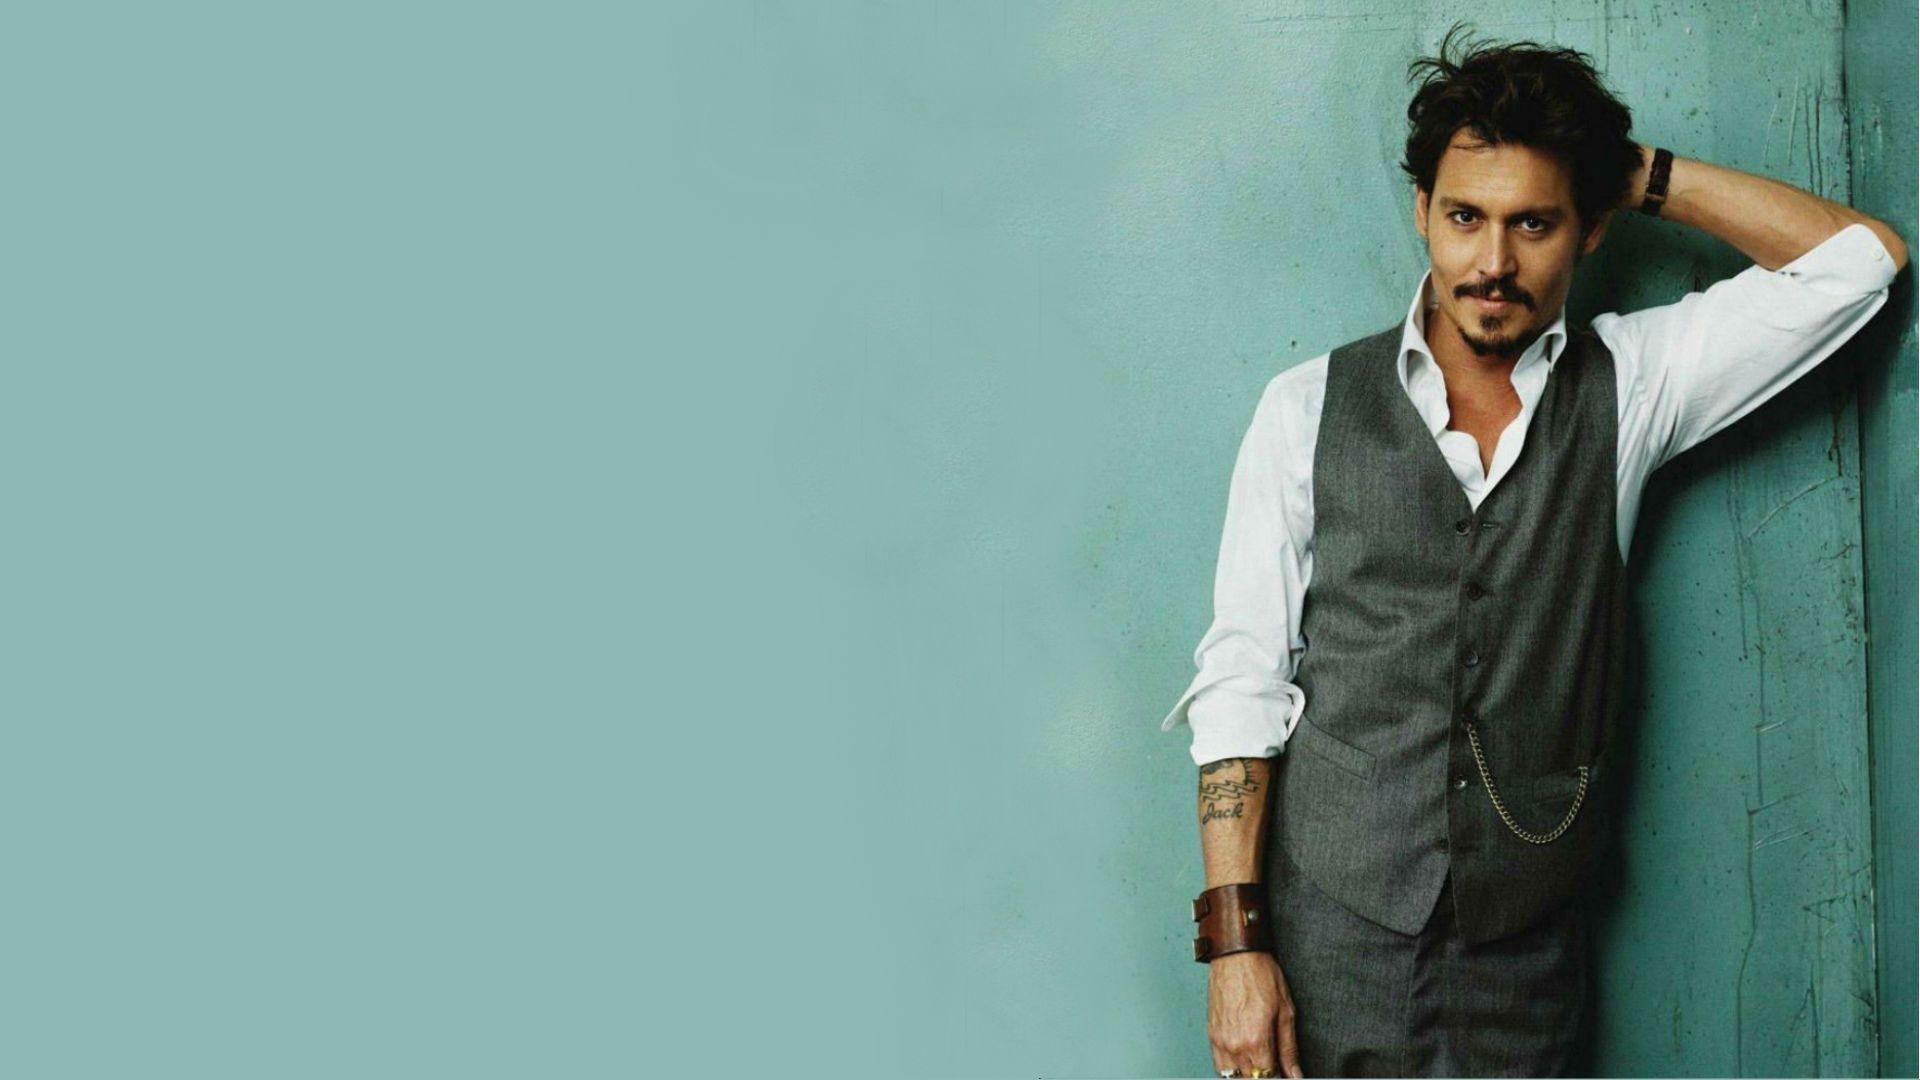 Johnny Depp Wallpaper High Resolution and Quality Download. HD